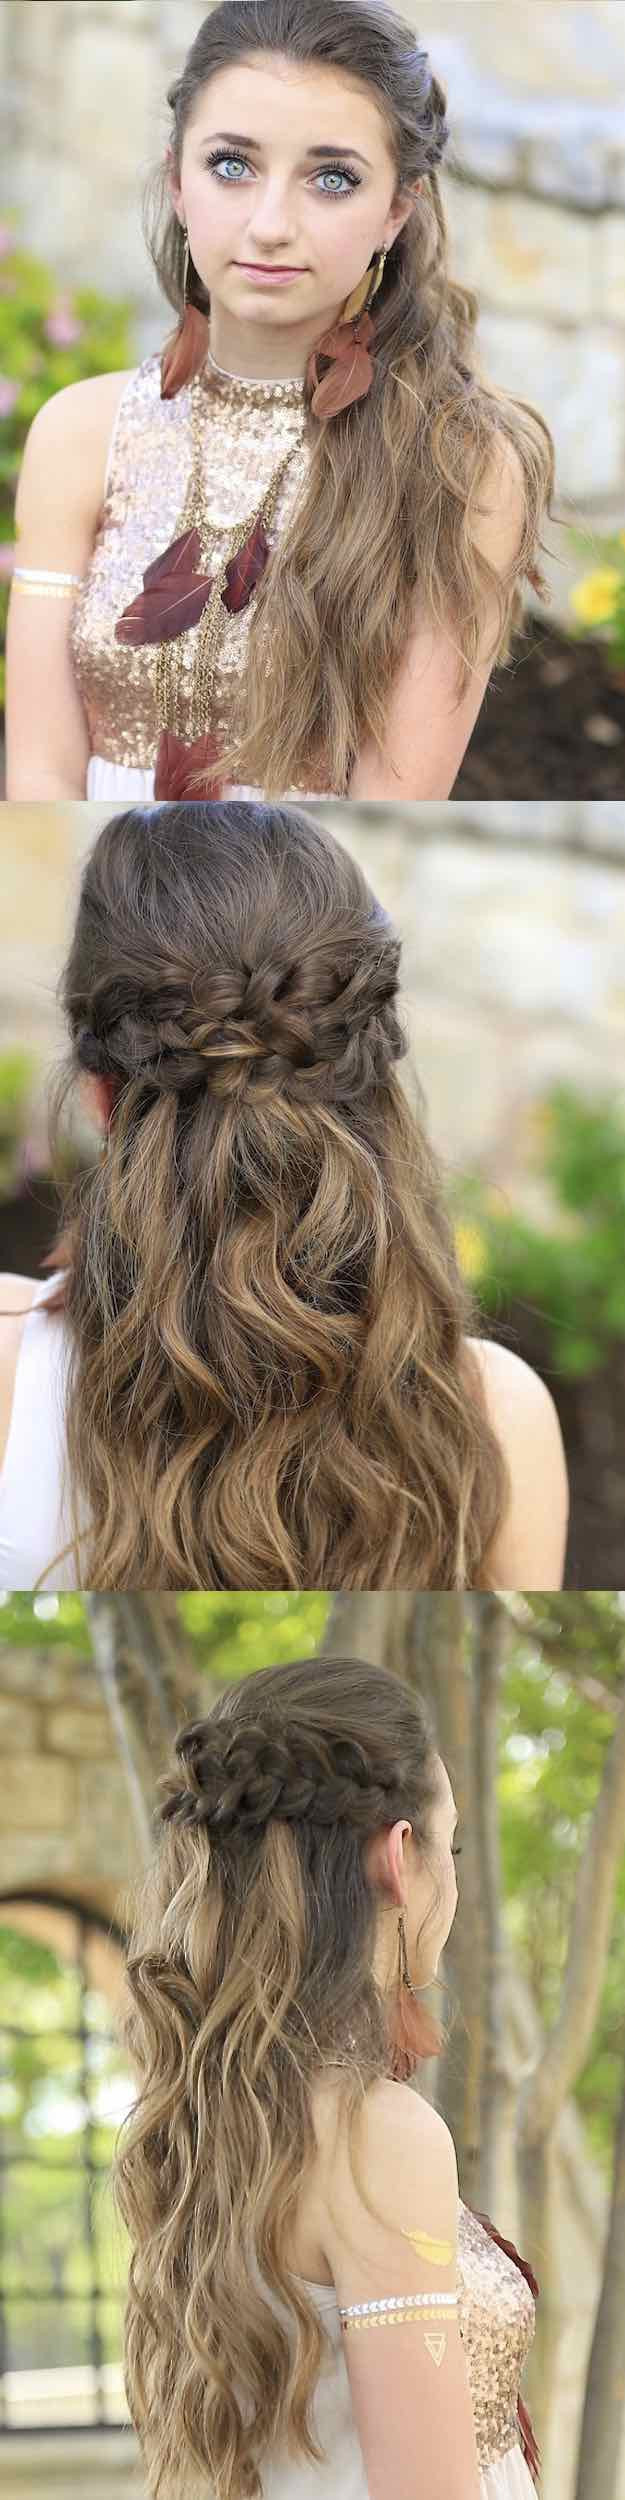 Prom Hairstyles For Short Hair Half Up Half Down
 25 Easy Half Up Half Down Hairstyle Tutorials For Prom